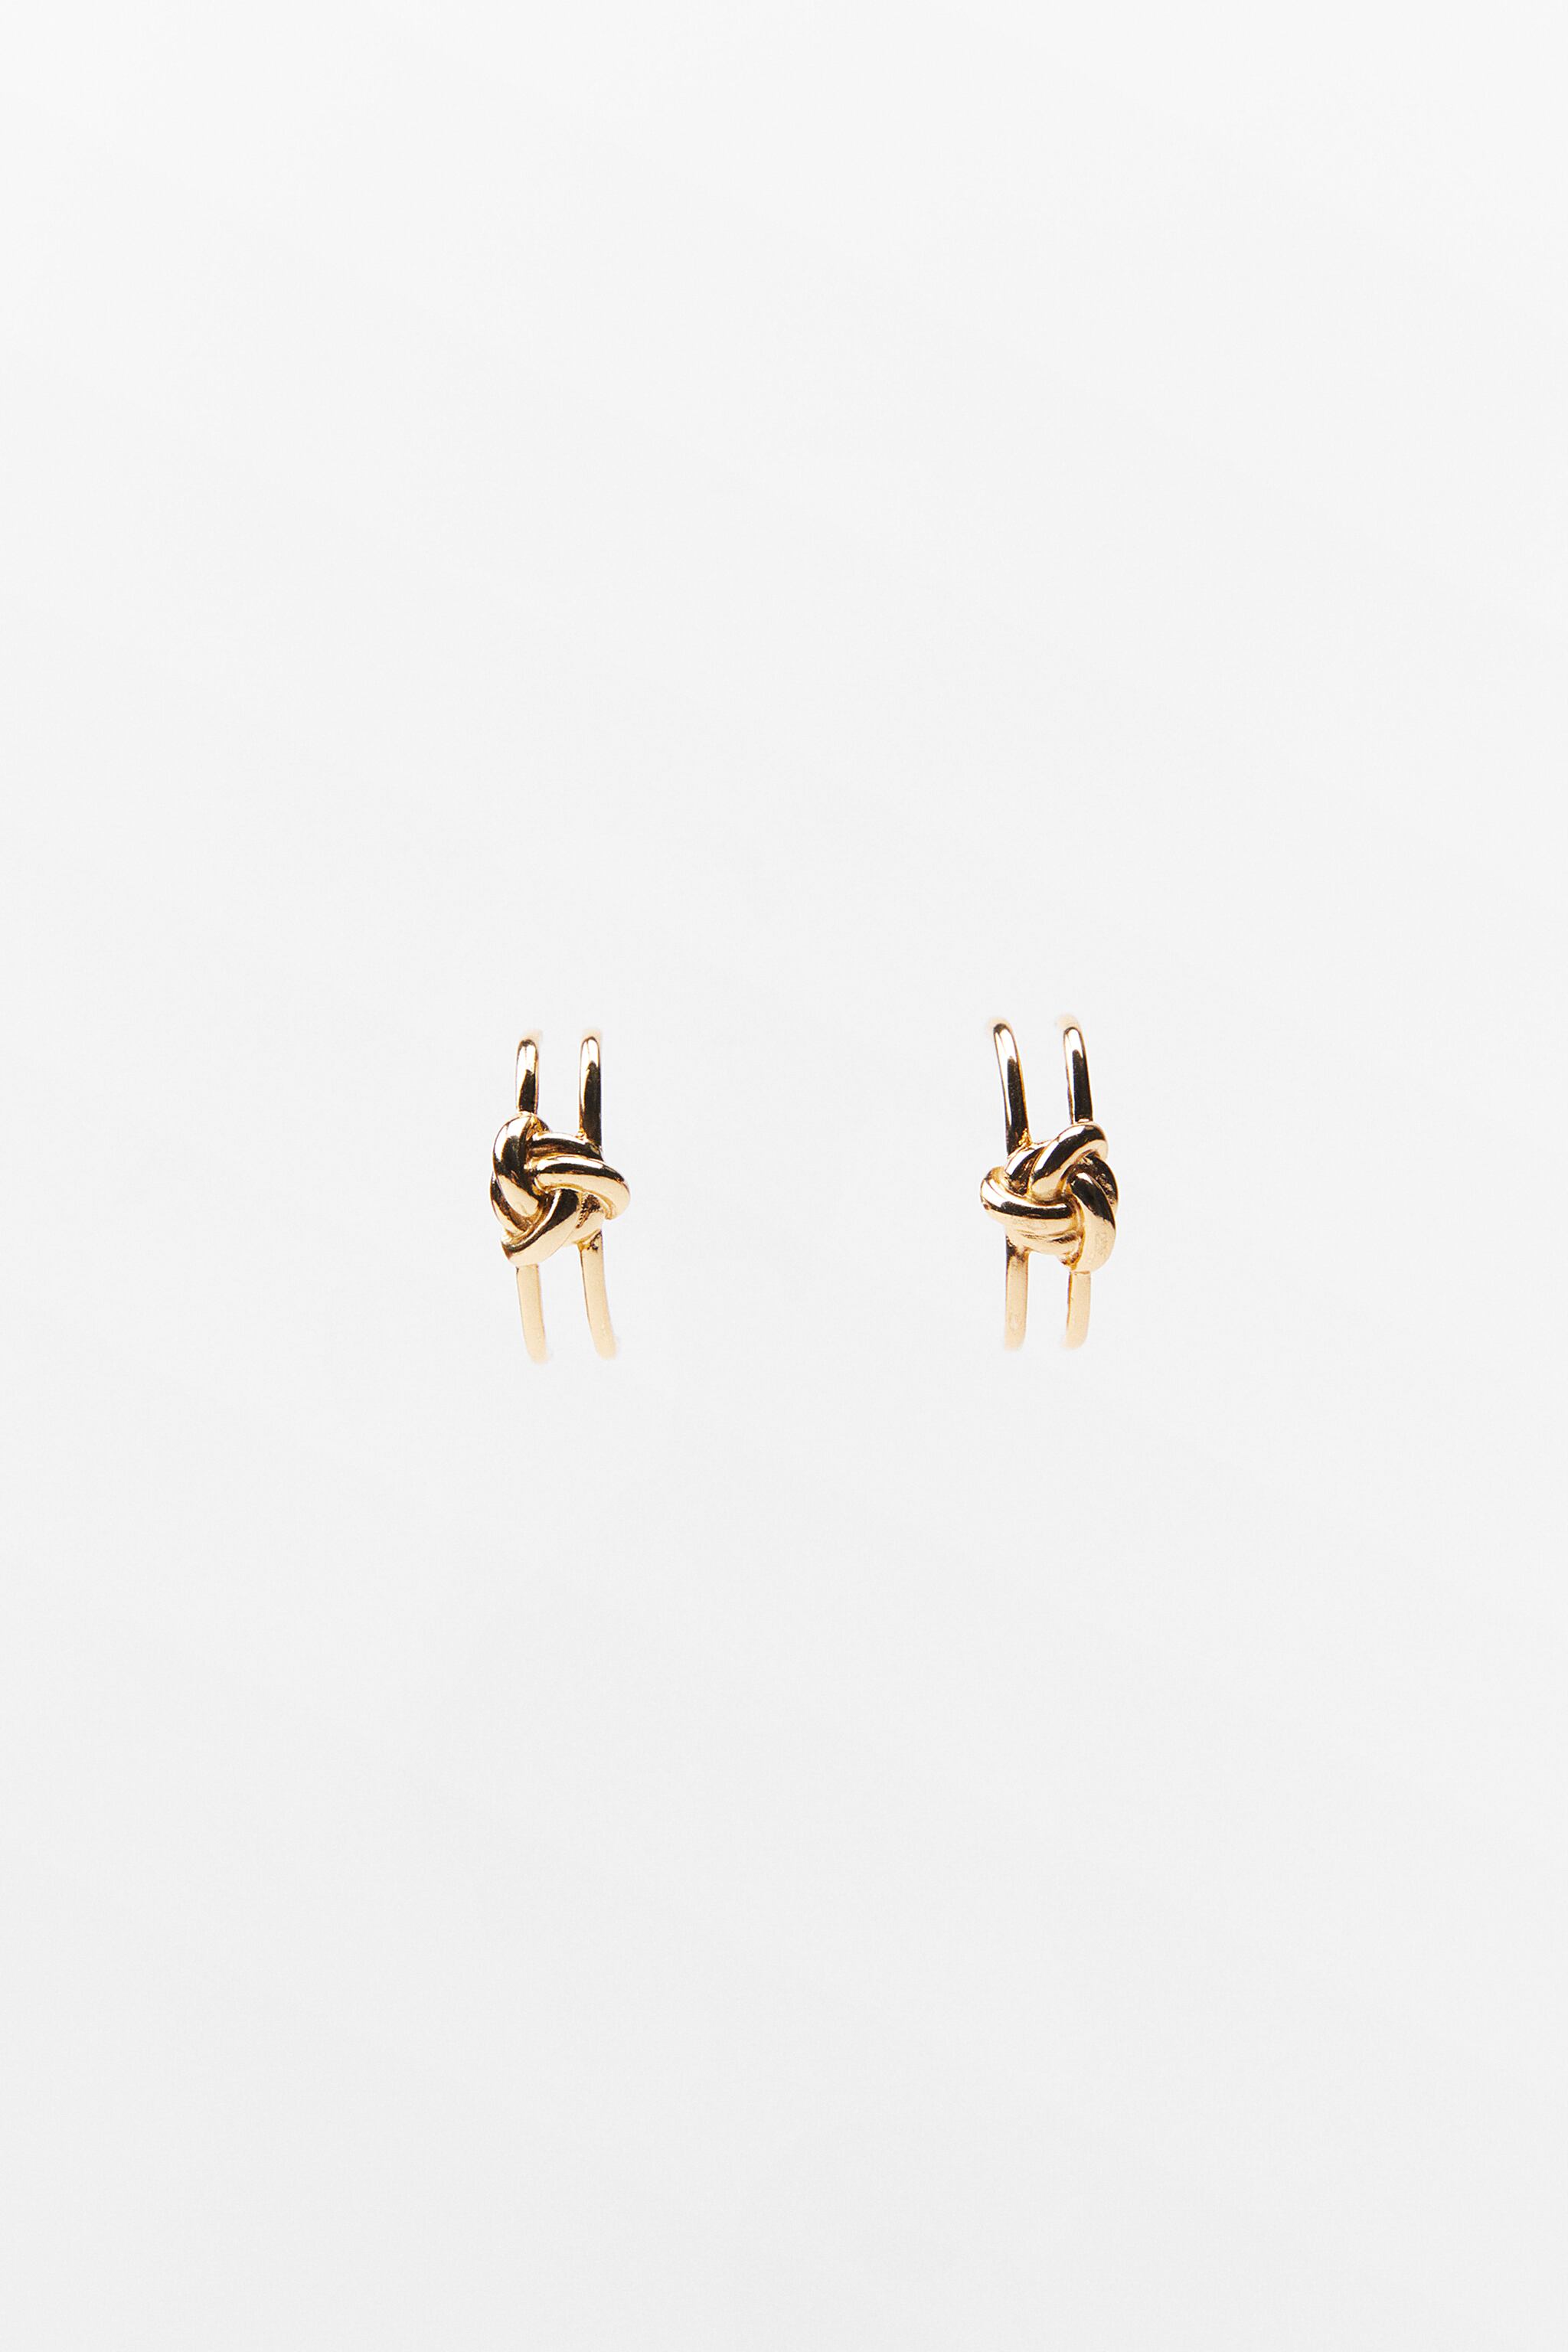 PACK OF KNOTTED EAR CUFF EARRINGS